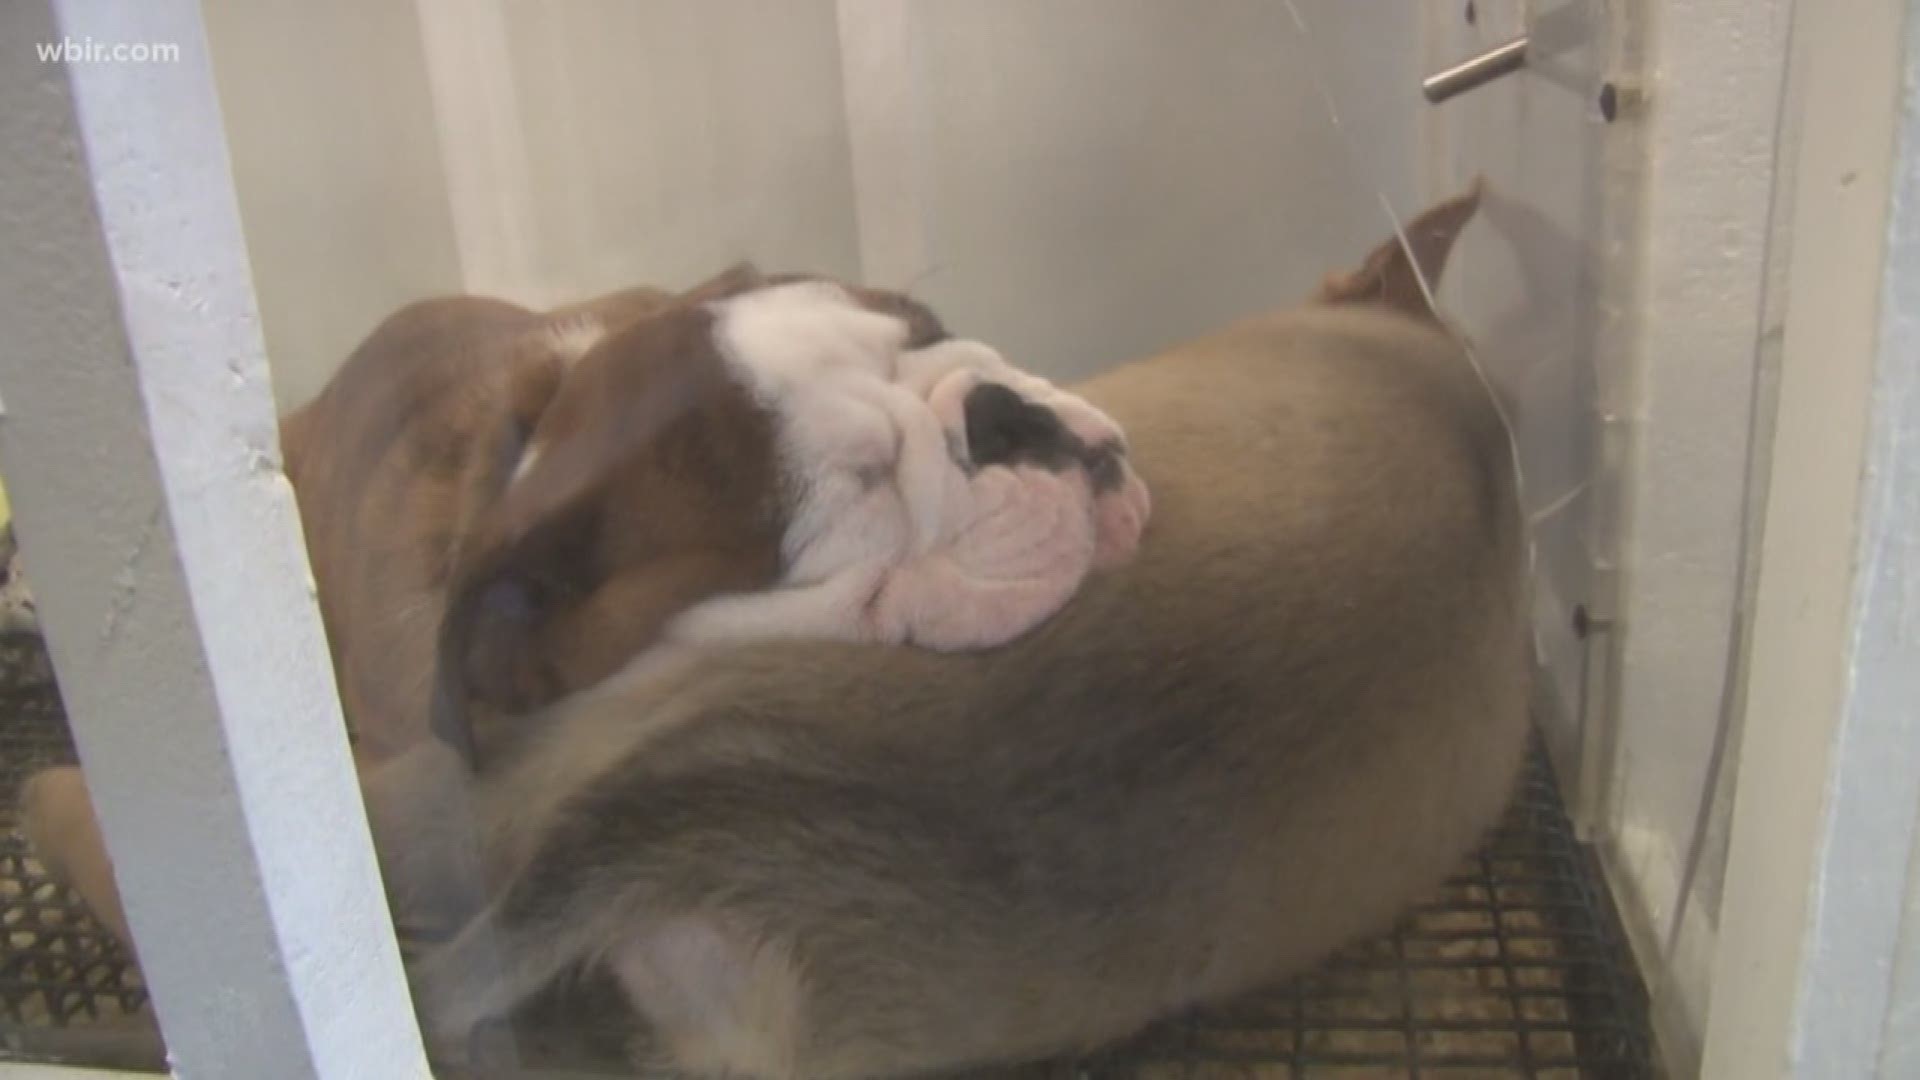 The woman said she was concerned about the puppies' welfare when she visited the Puppy Zone store in Knoxville this weekend.